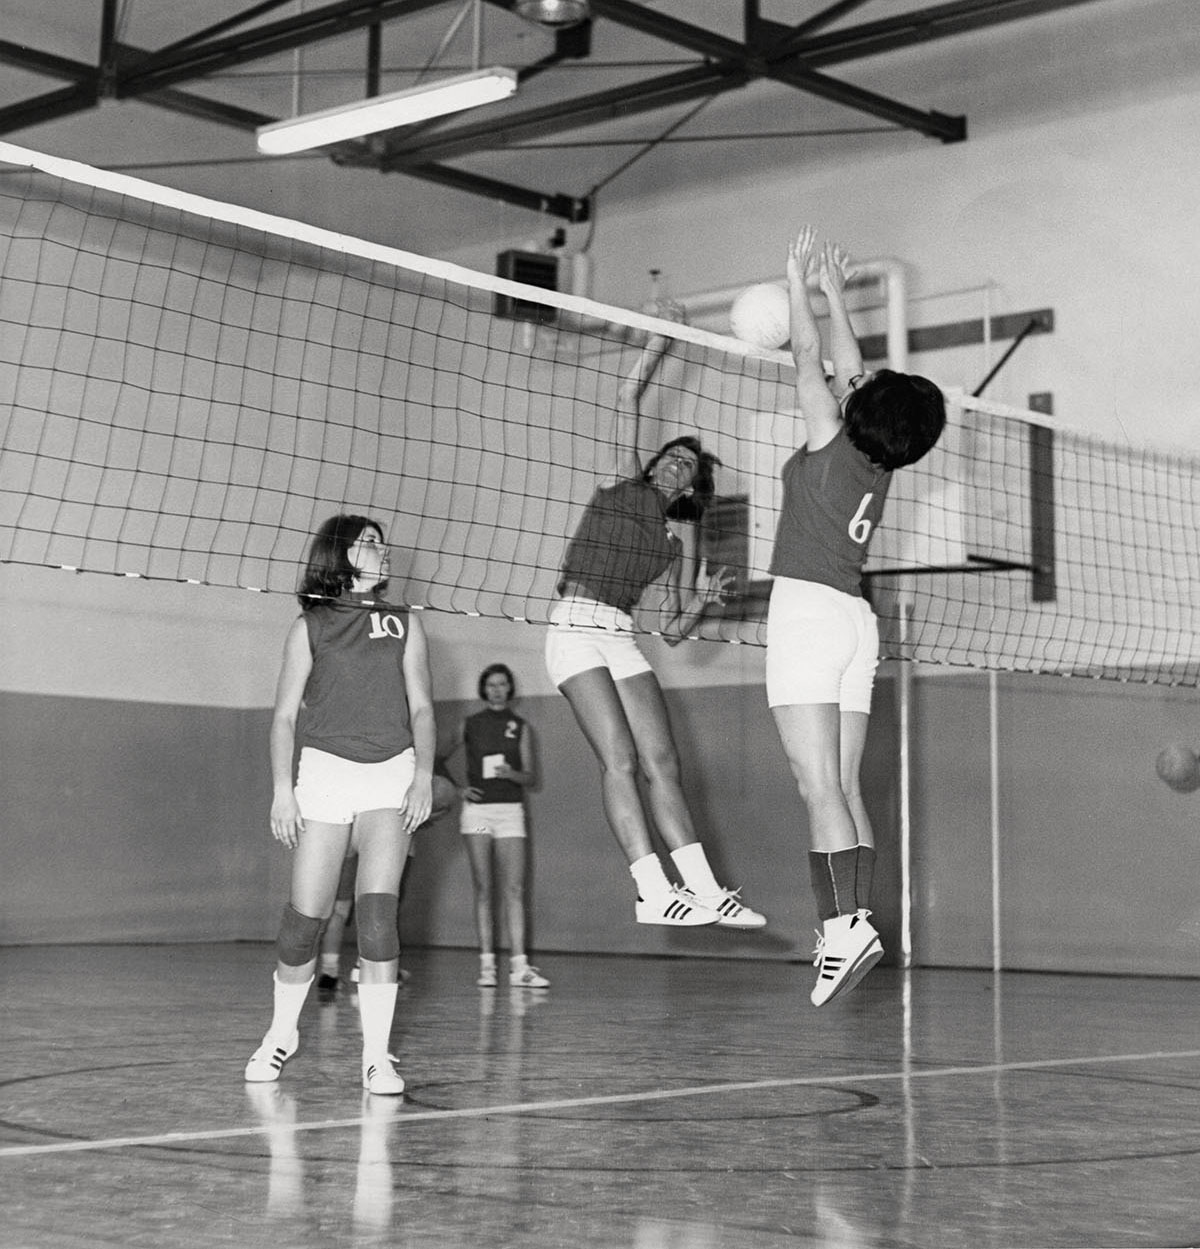 One woman reaches up toward a net while another puts two hands in the air to block a volleyball in a gymnasium